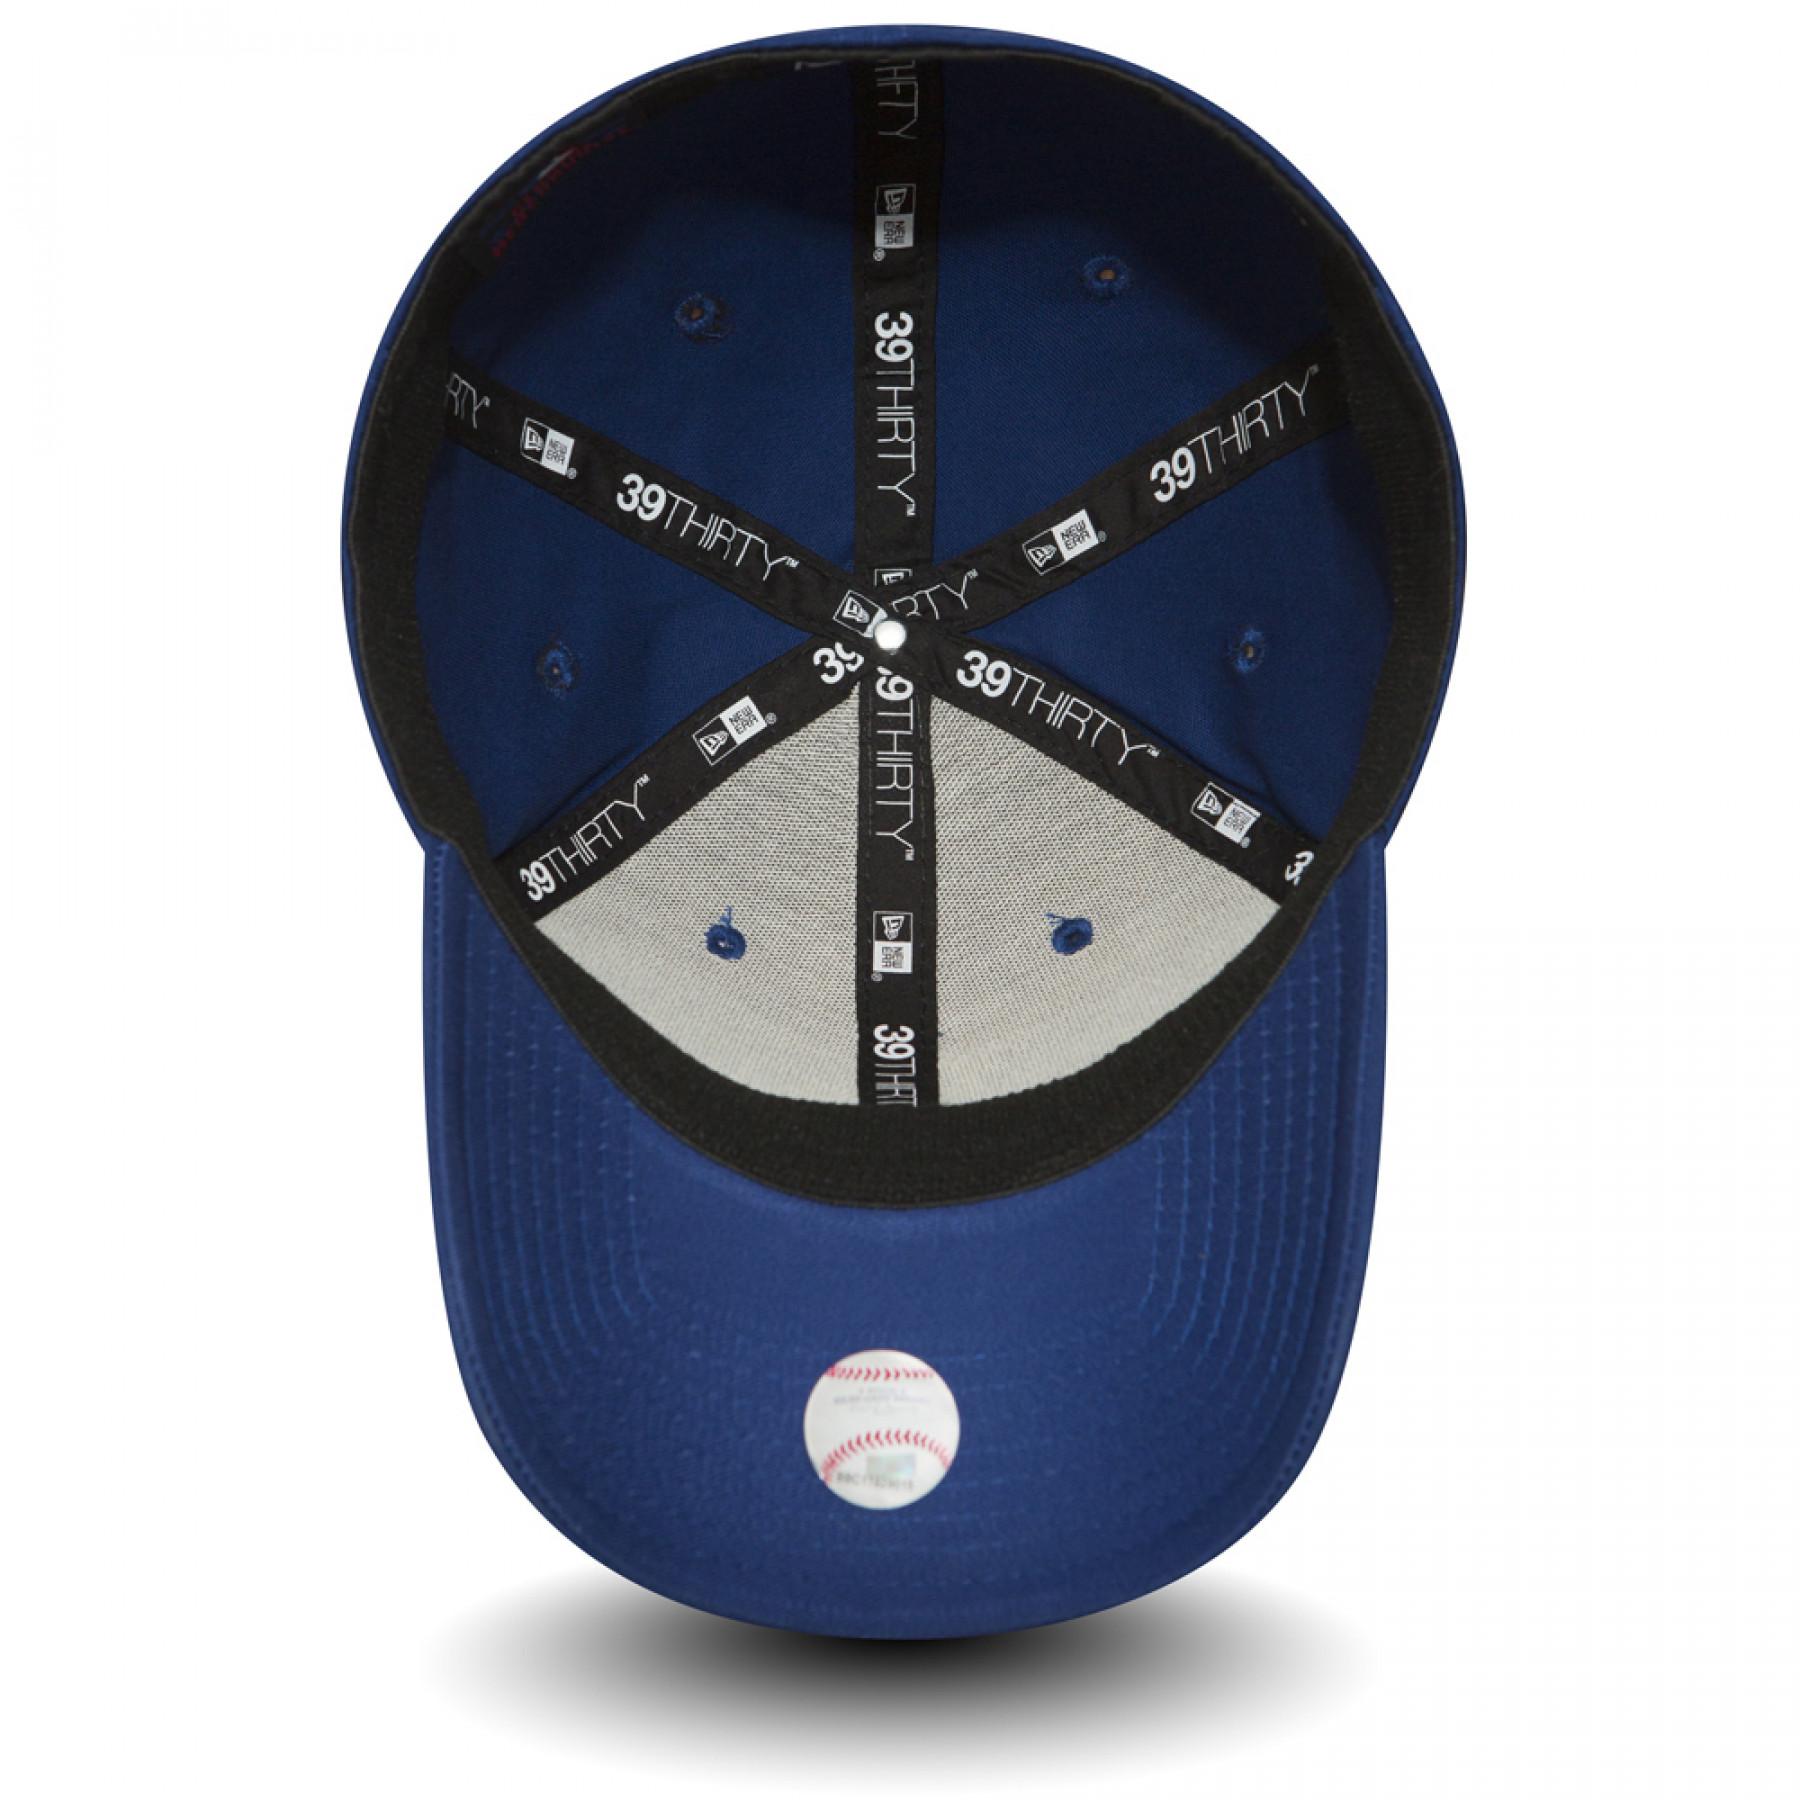 Casquette New Era essential 39thirty Los Angeles Dodgers